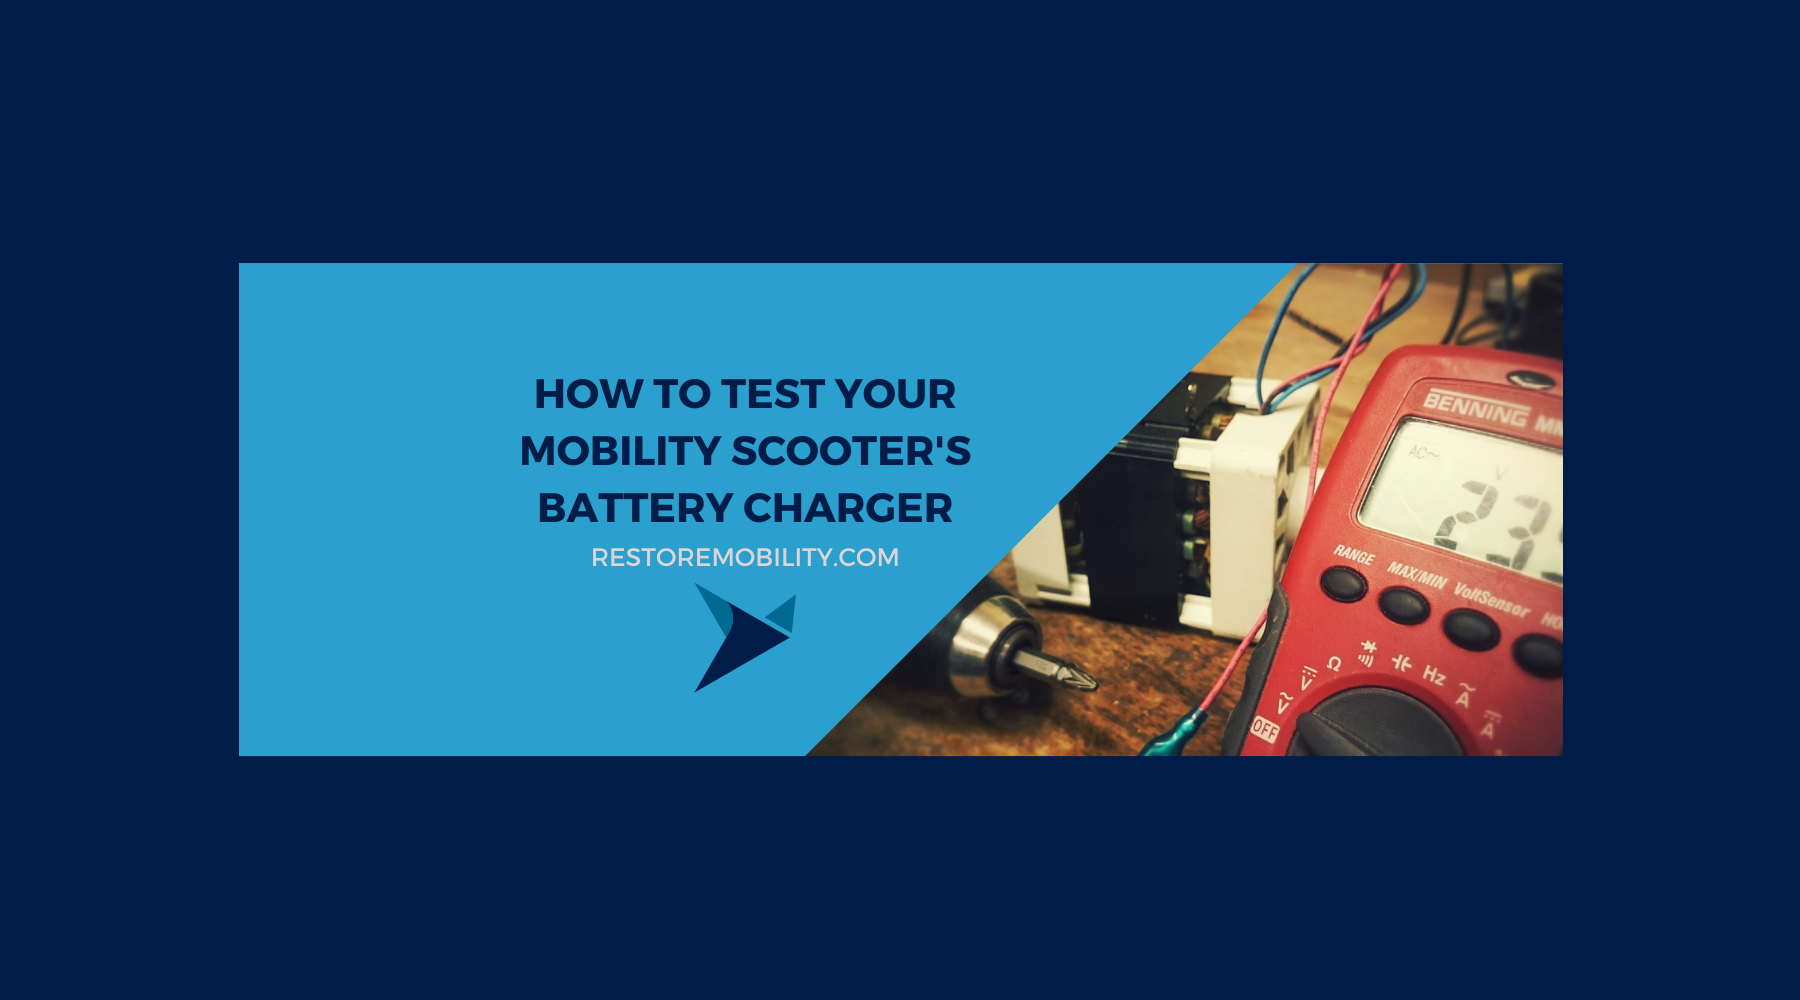 How to Test Your Mobility Scooter's Battery Charger